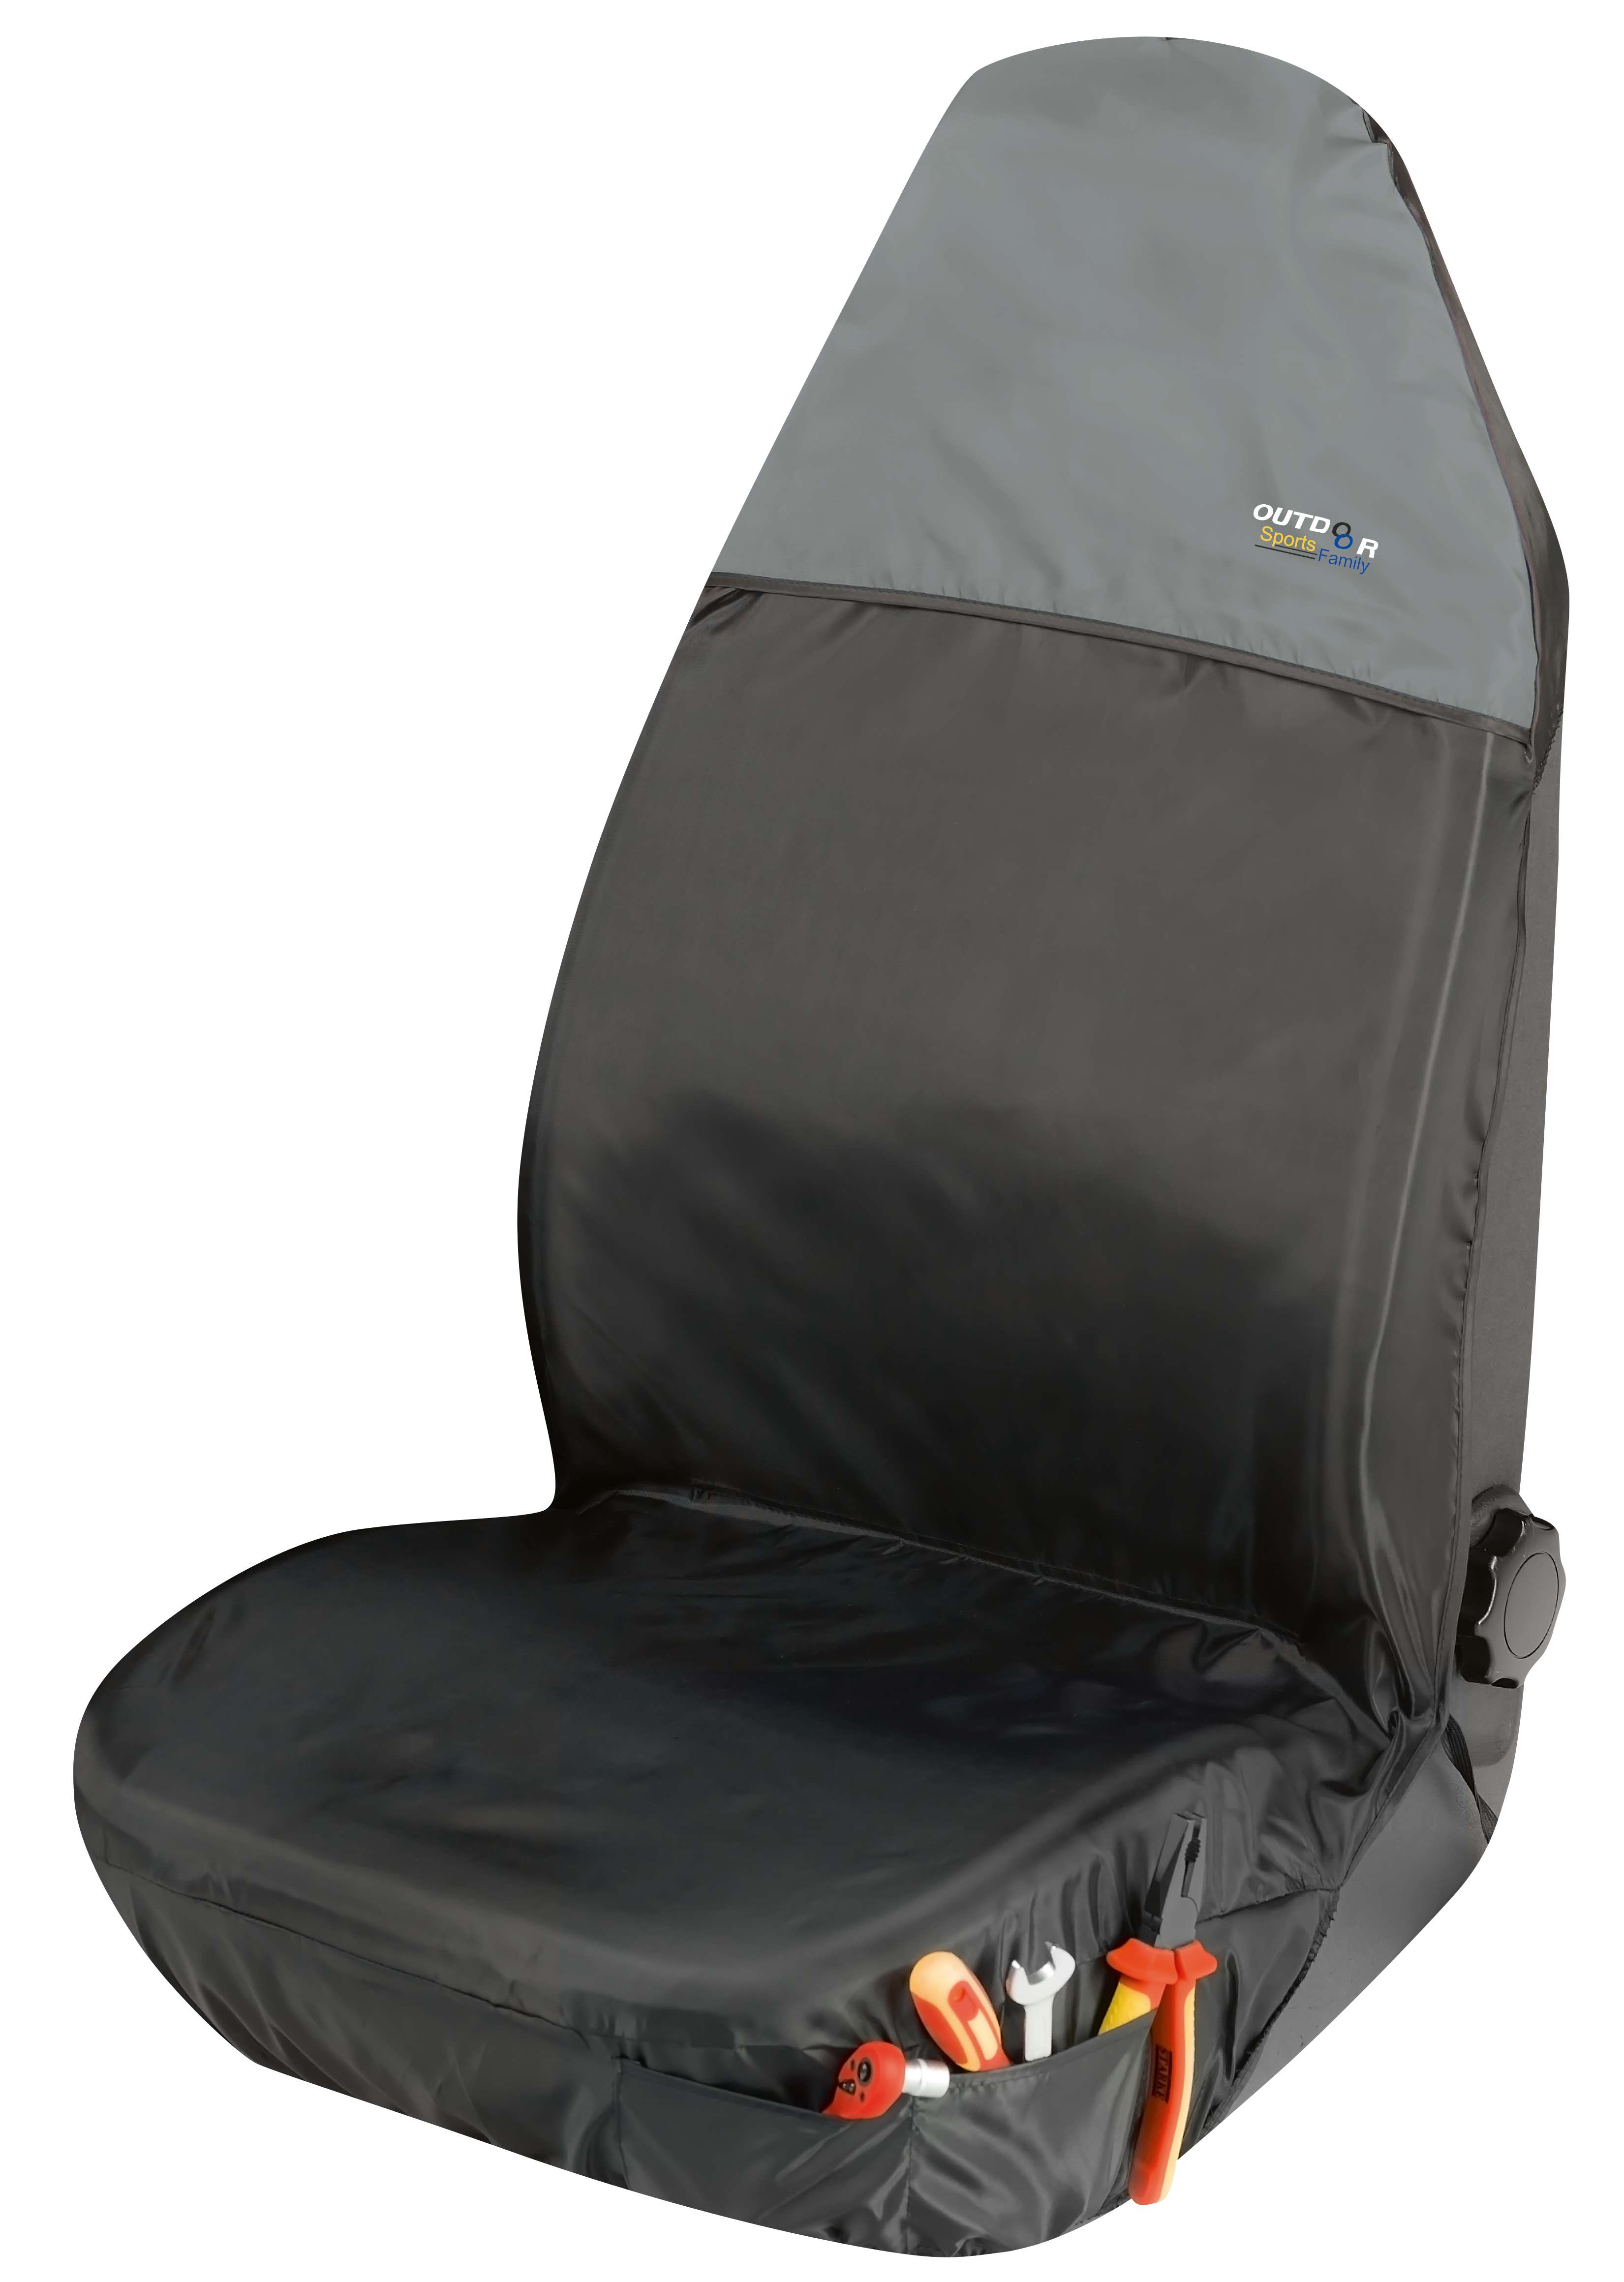 Picture of Walser Polyester Protective Seat Cover - Black Grey